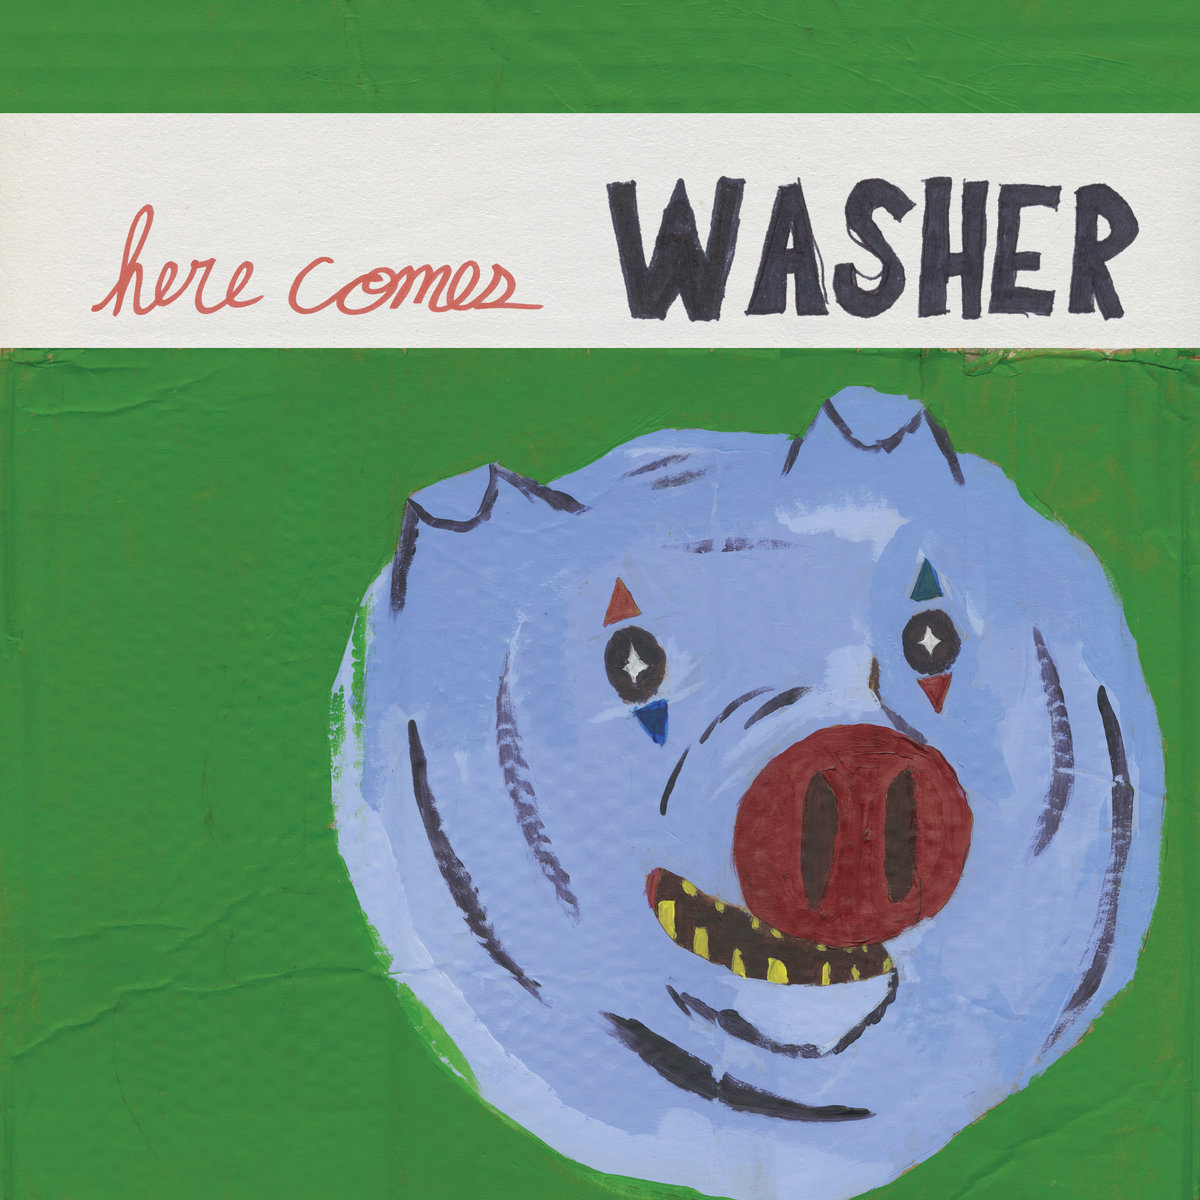 Here Comes Washer is a personal favorite of mine. Super simple but effective garage punk type music. Not for everyone, but a lot of the songs in this album are just super solid